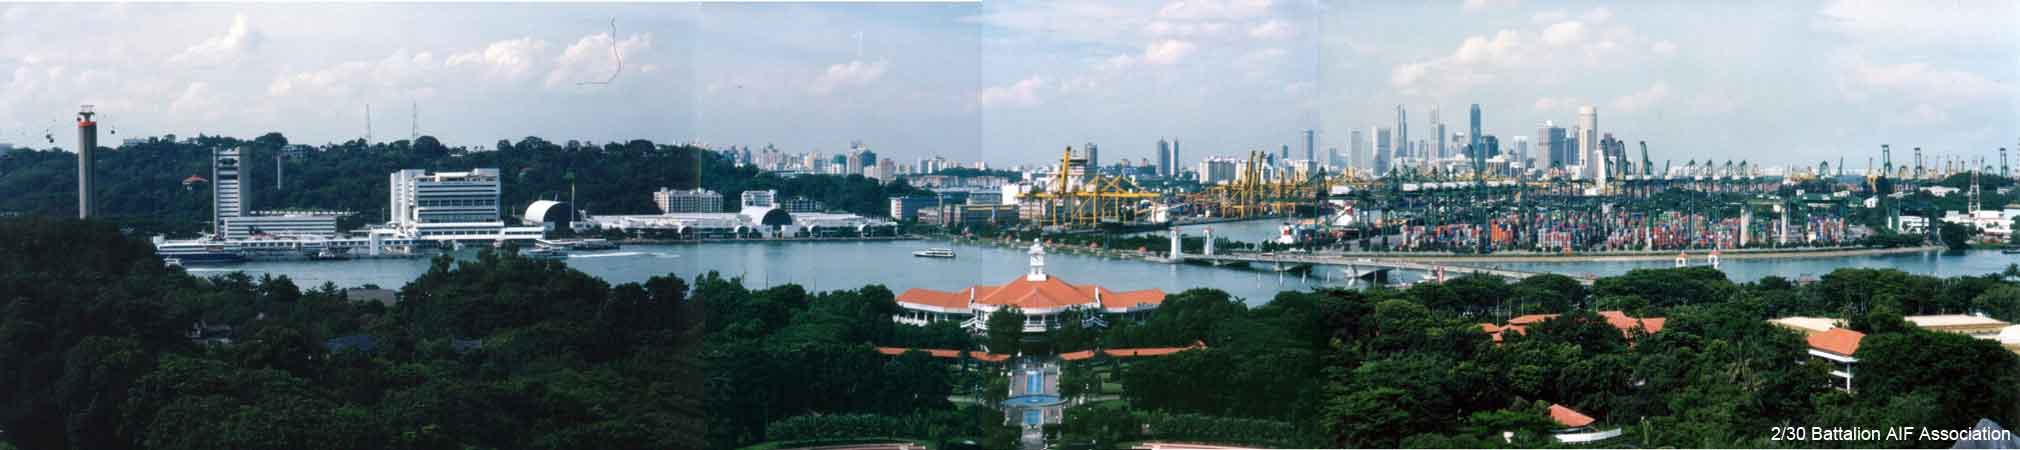 Keppel Harbour, Singapore
Panorama of the cable car station, Jardine Steps, Keppel Harbour and Singapore docks. Taken from the Merlion lookout on Sentosa.
Keywords: 061226